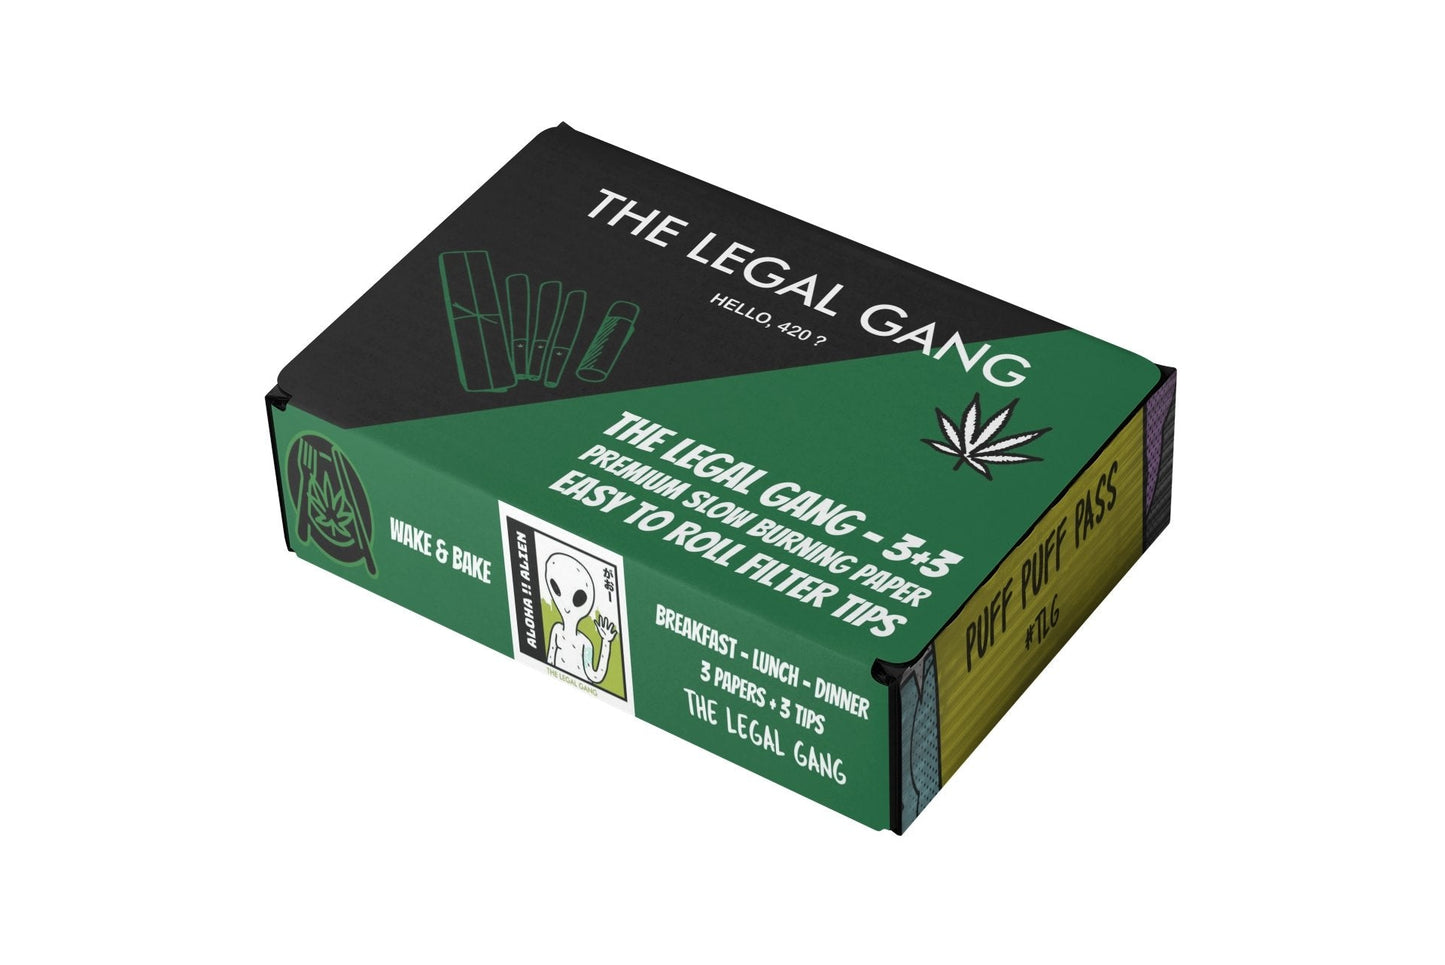 thelegalgang,Rolling Paper India - The Legal Gang,.